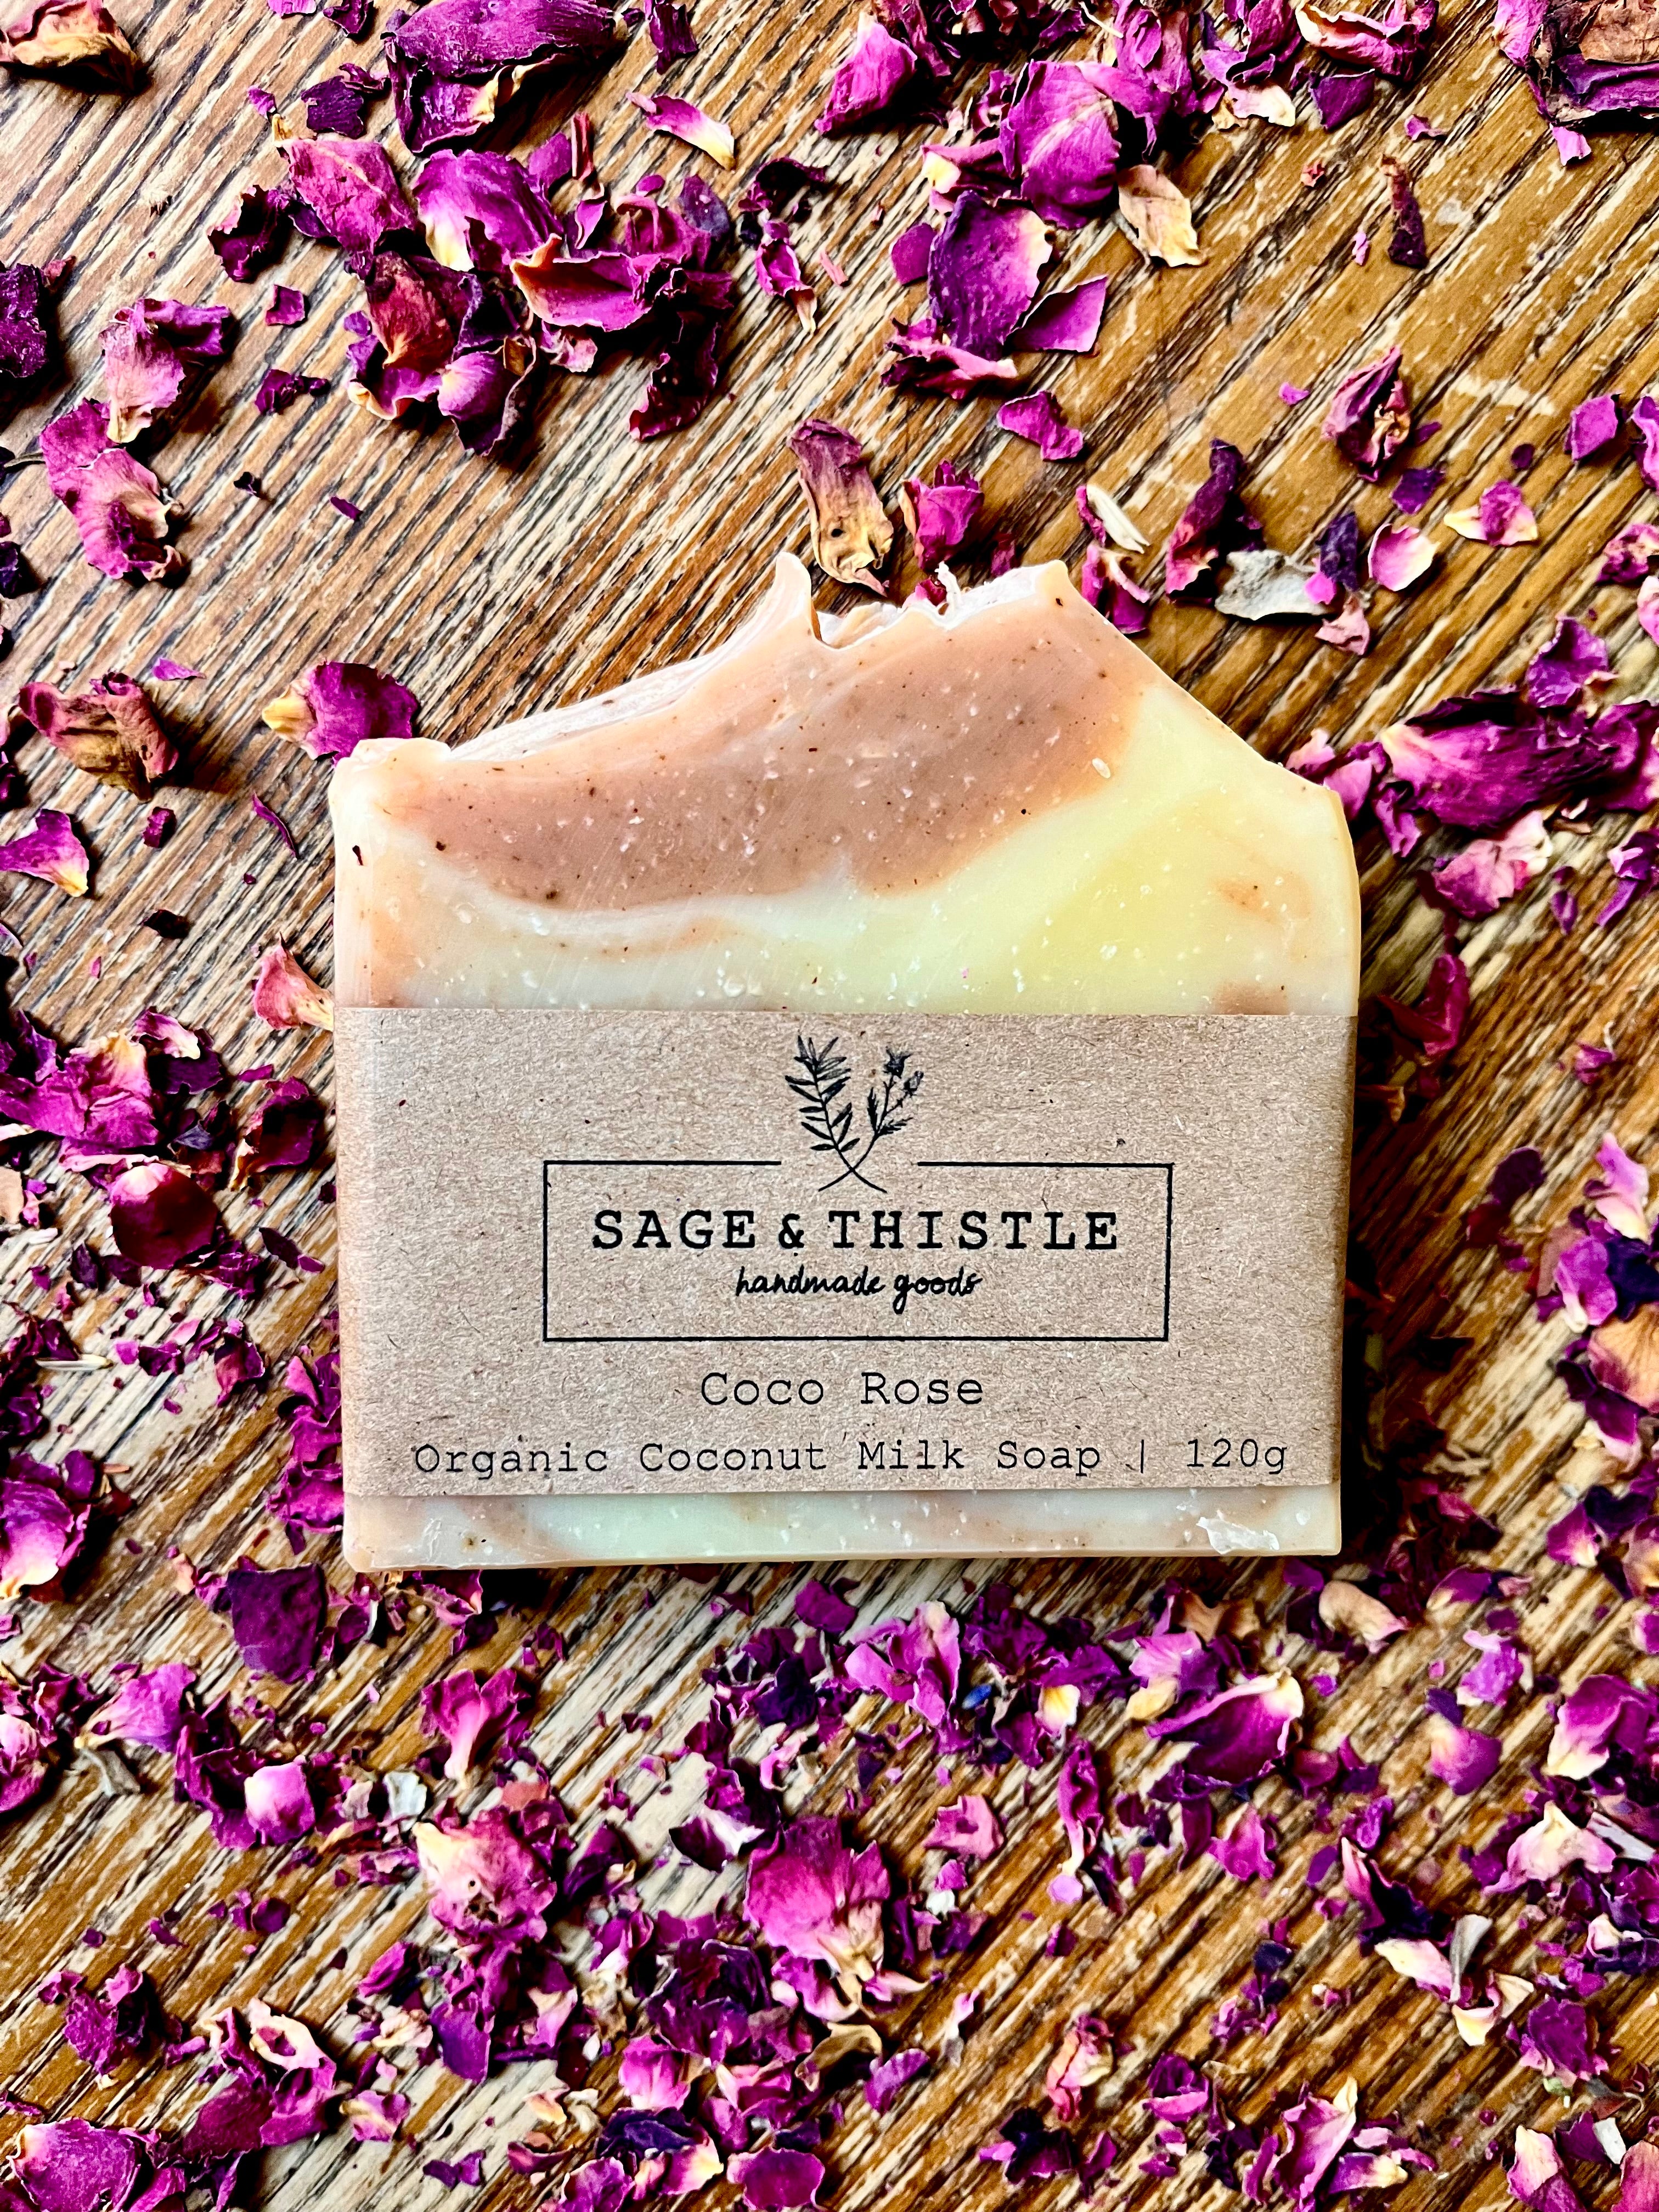 Natural vegan bar soap made with organic coconut milk, roses, and French Pink Clay. Great facial and body soap for all skin types.